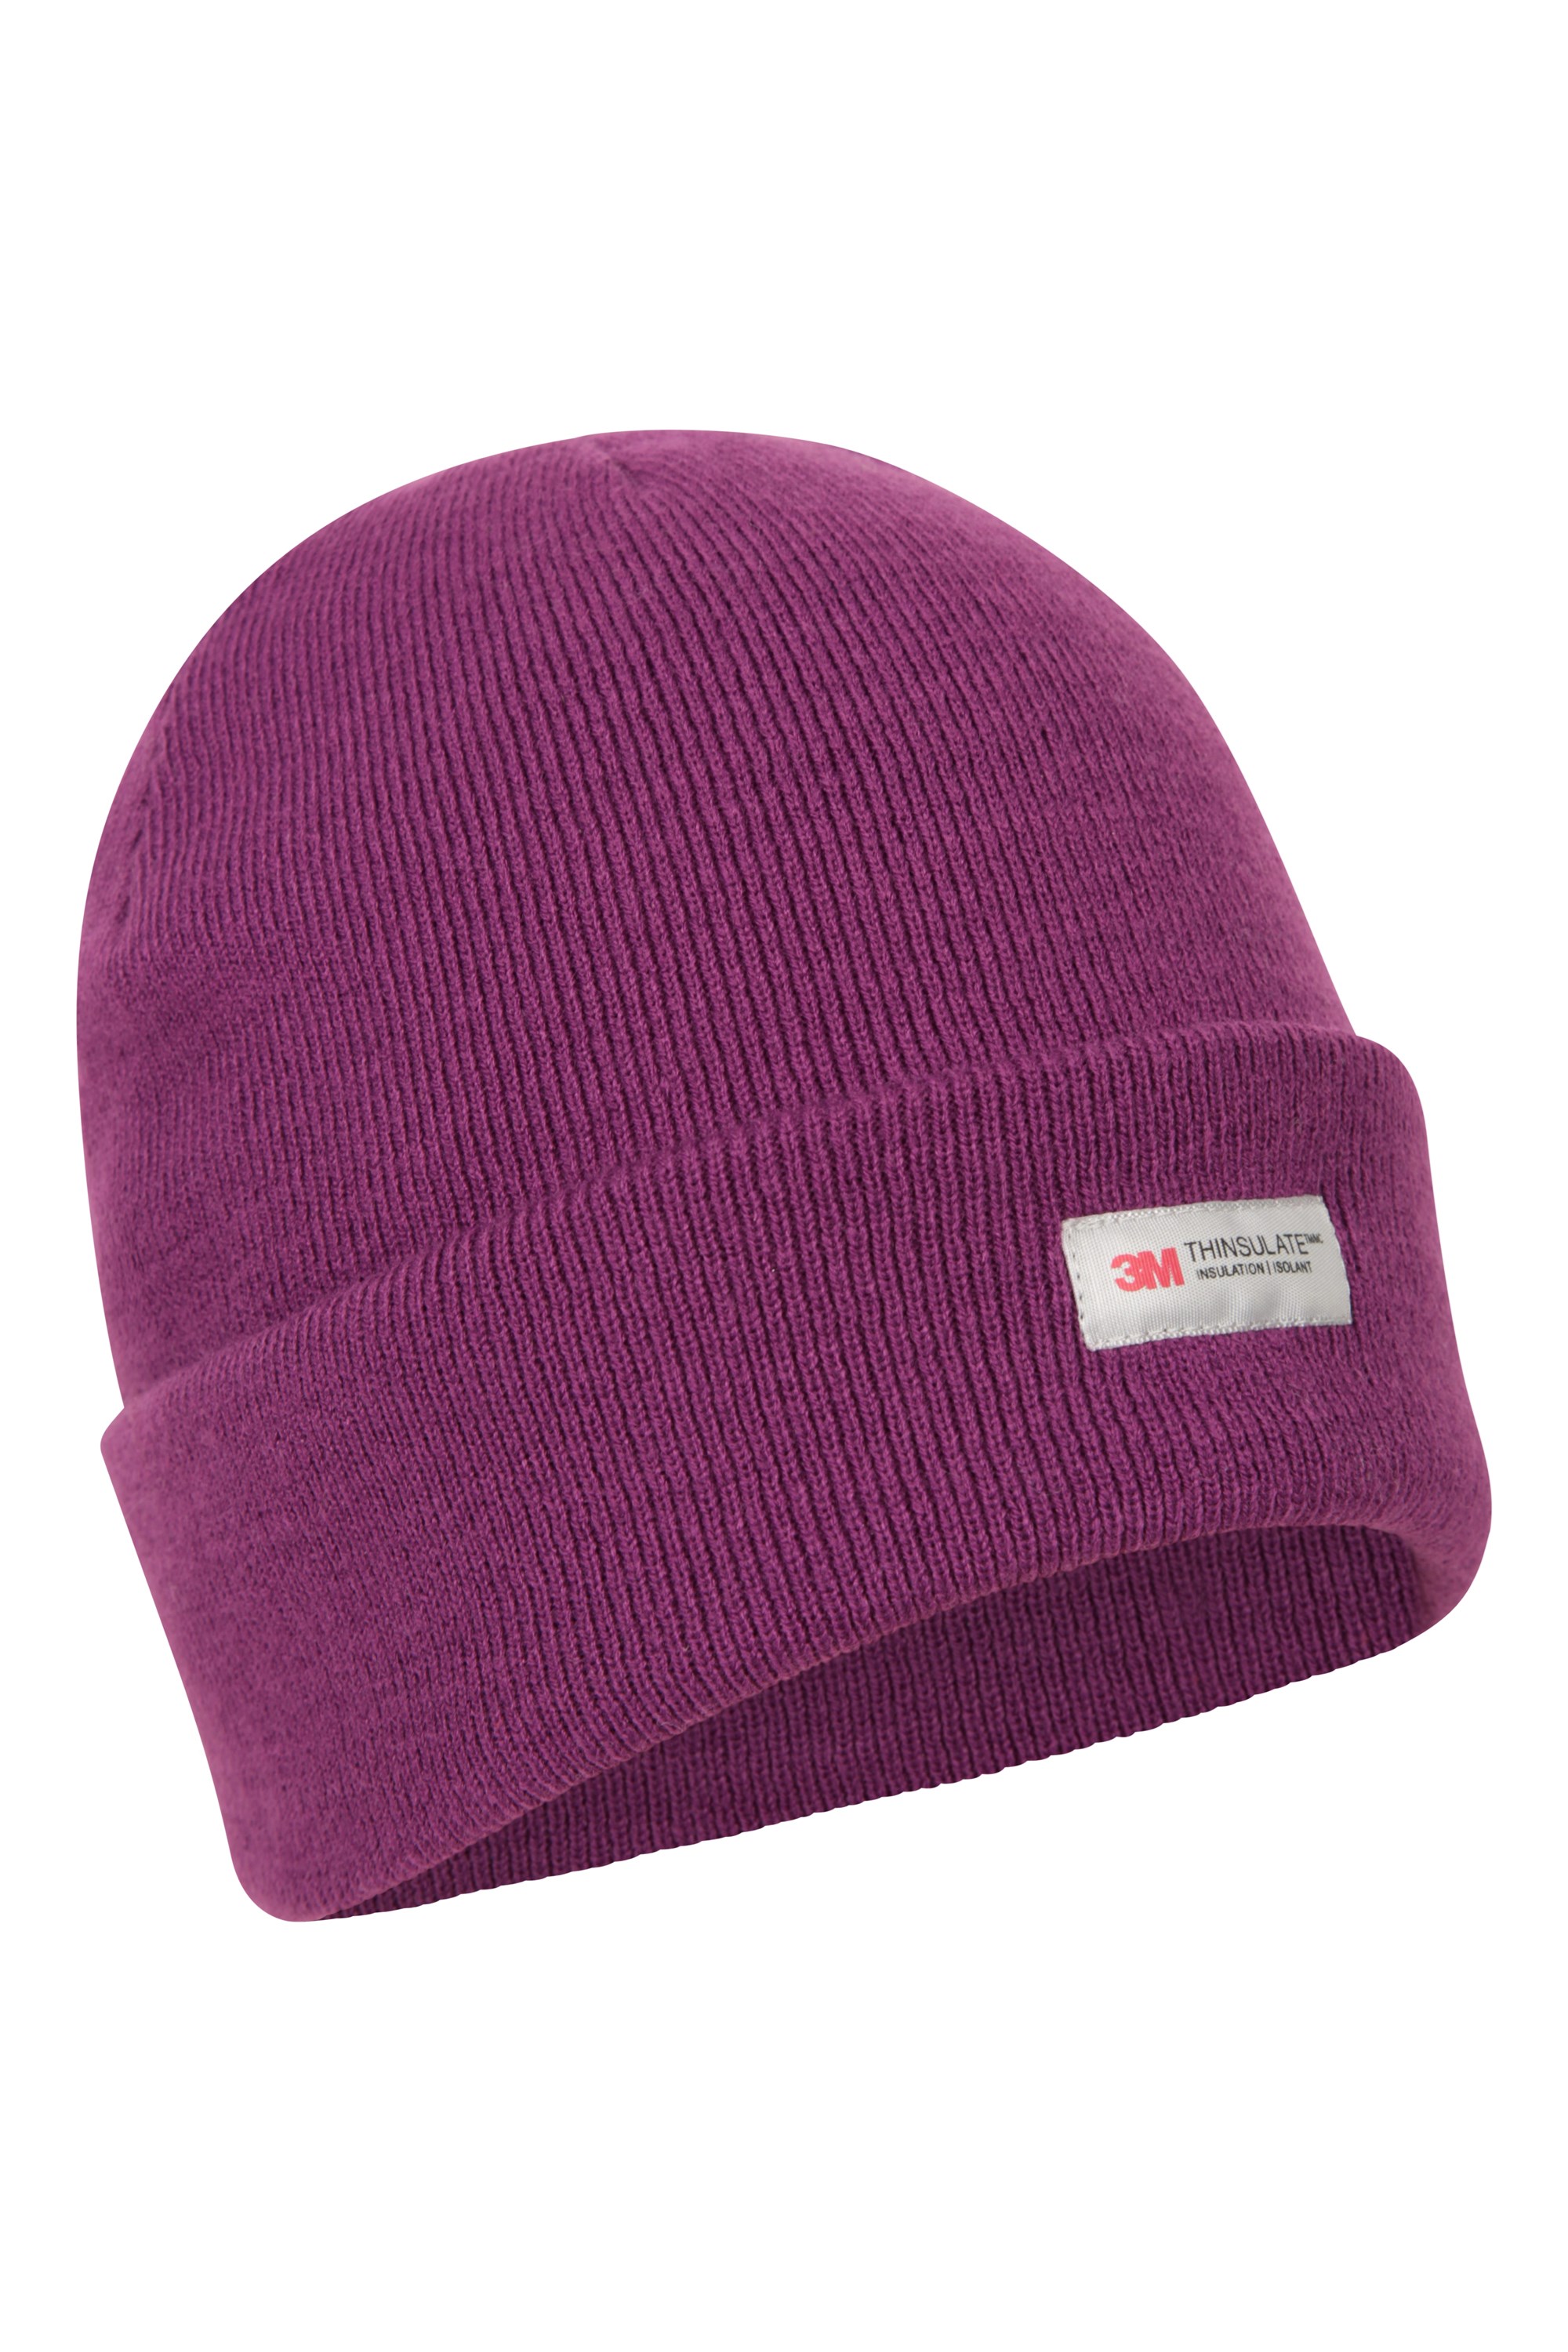 Mountain Warehouse Purple Beanie 3M Thinsulate Womens Knitted Hat From Mountain Warehouse S-M 